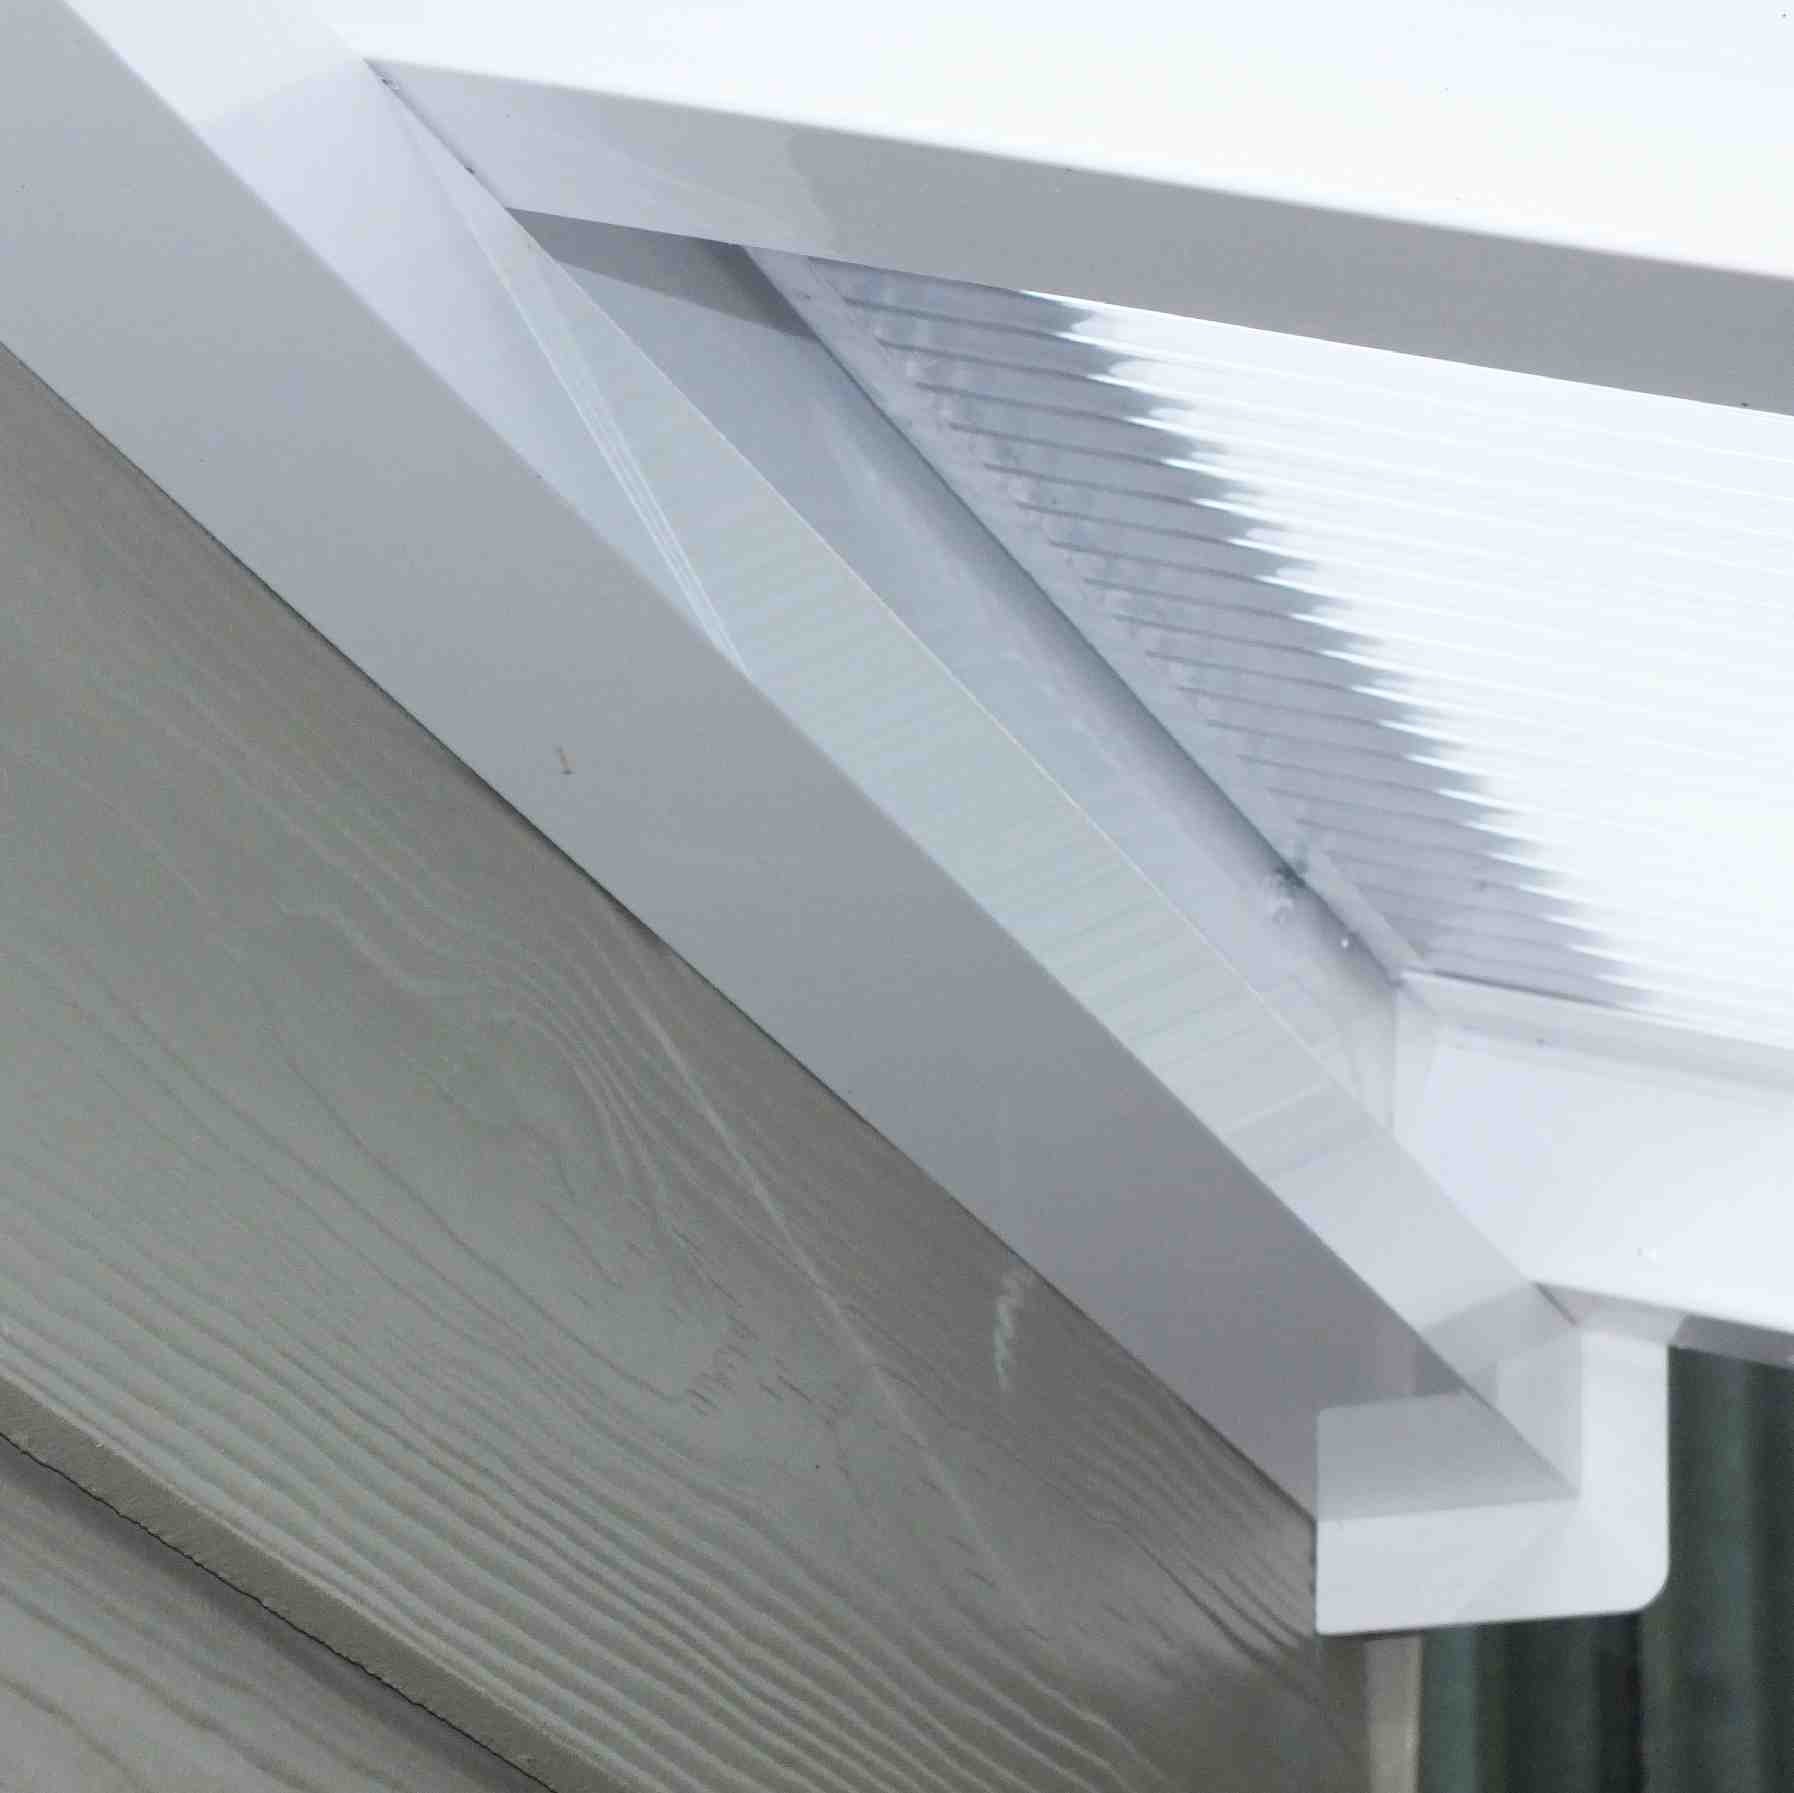 Great deals on Omega Verandah White with 16mm Polycarbonate Glazing - 9.5m (W) x 2.5m (P), (5) Supporting Posts